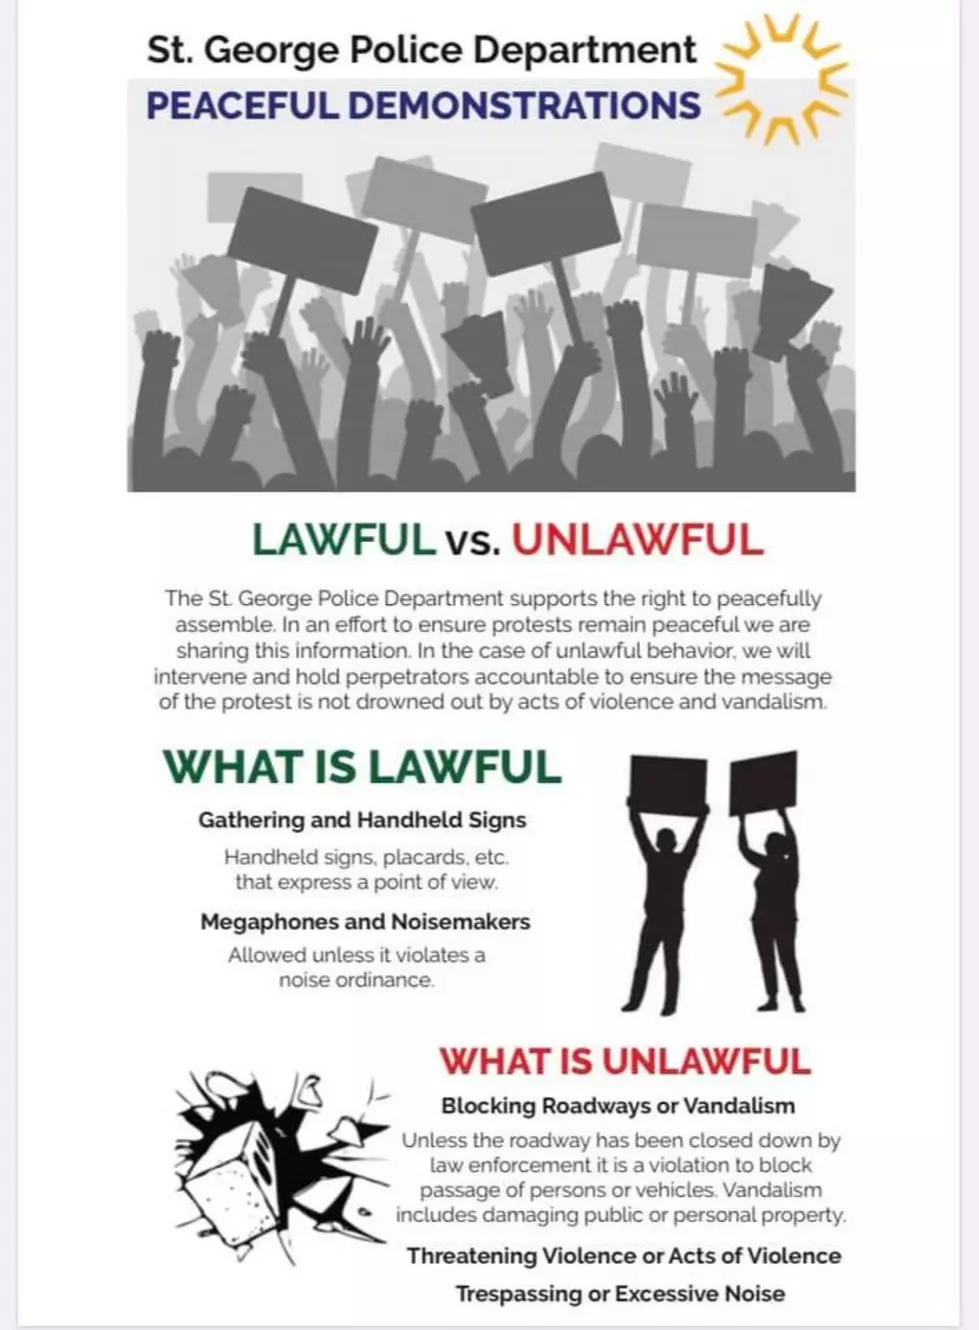 Lawful and unlawful protests